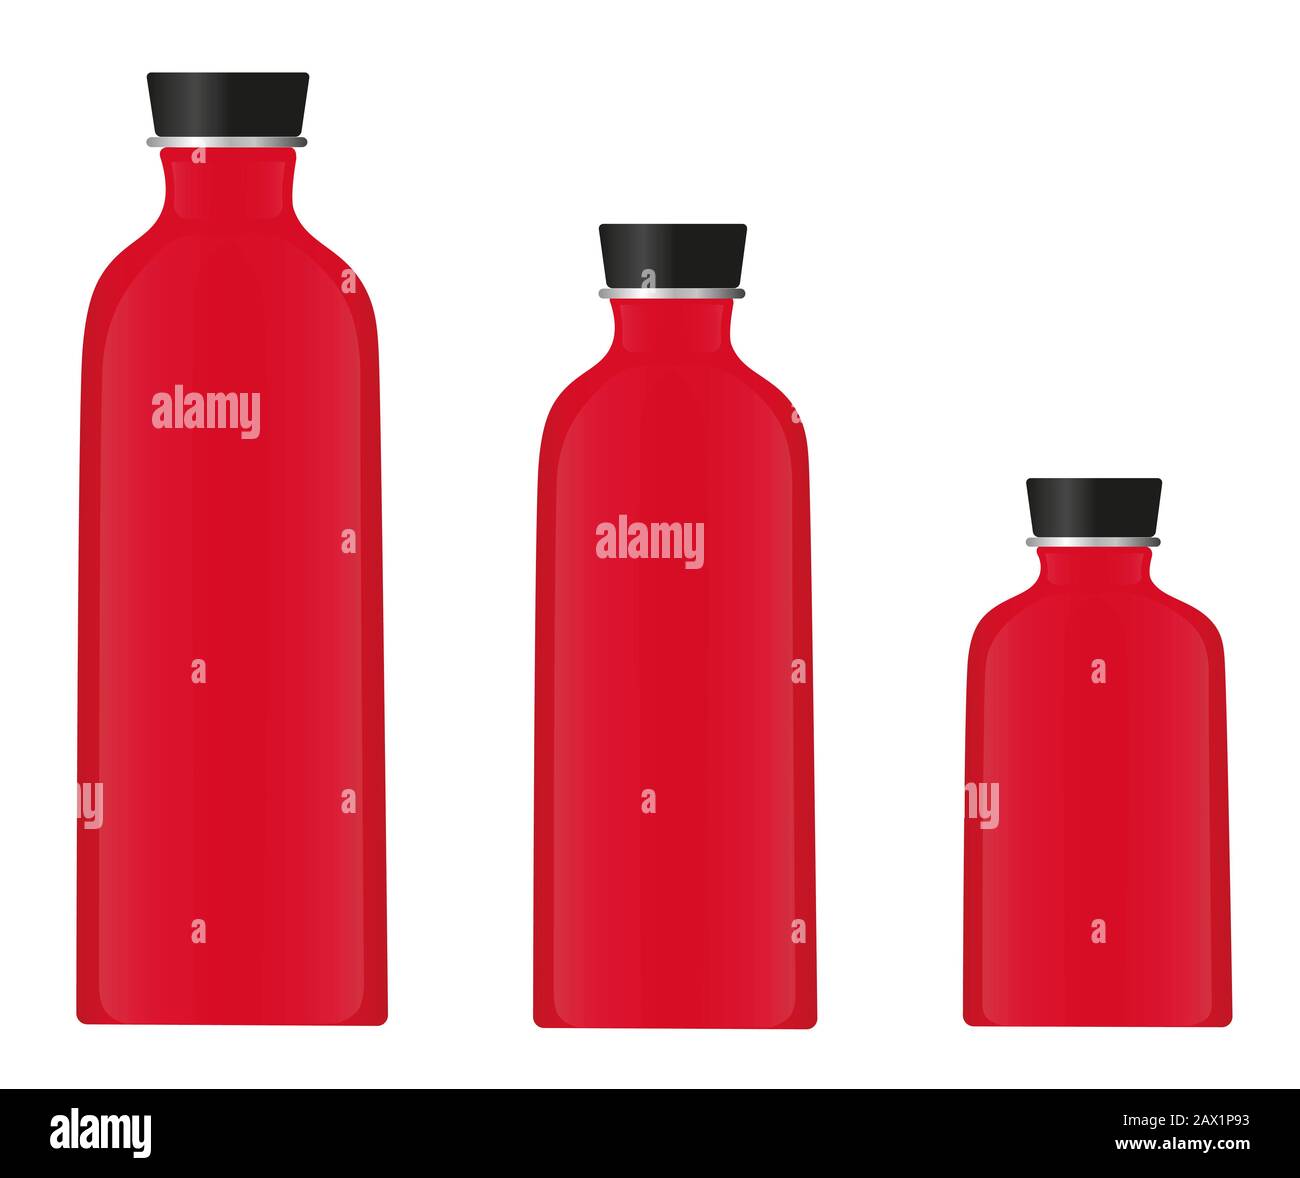 https://c8.alamy.com/comp/2AX1P93/three-red-water-bottles-isolted-on-white-background-2AX1P93.jpg